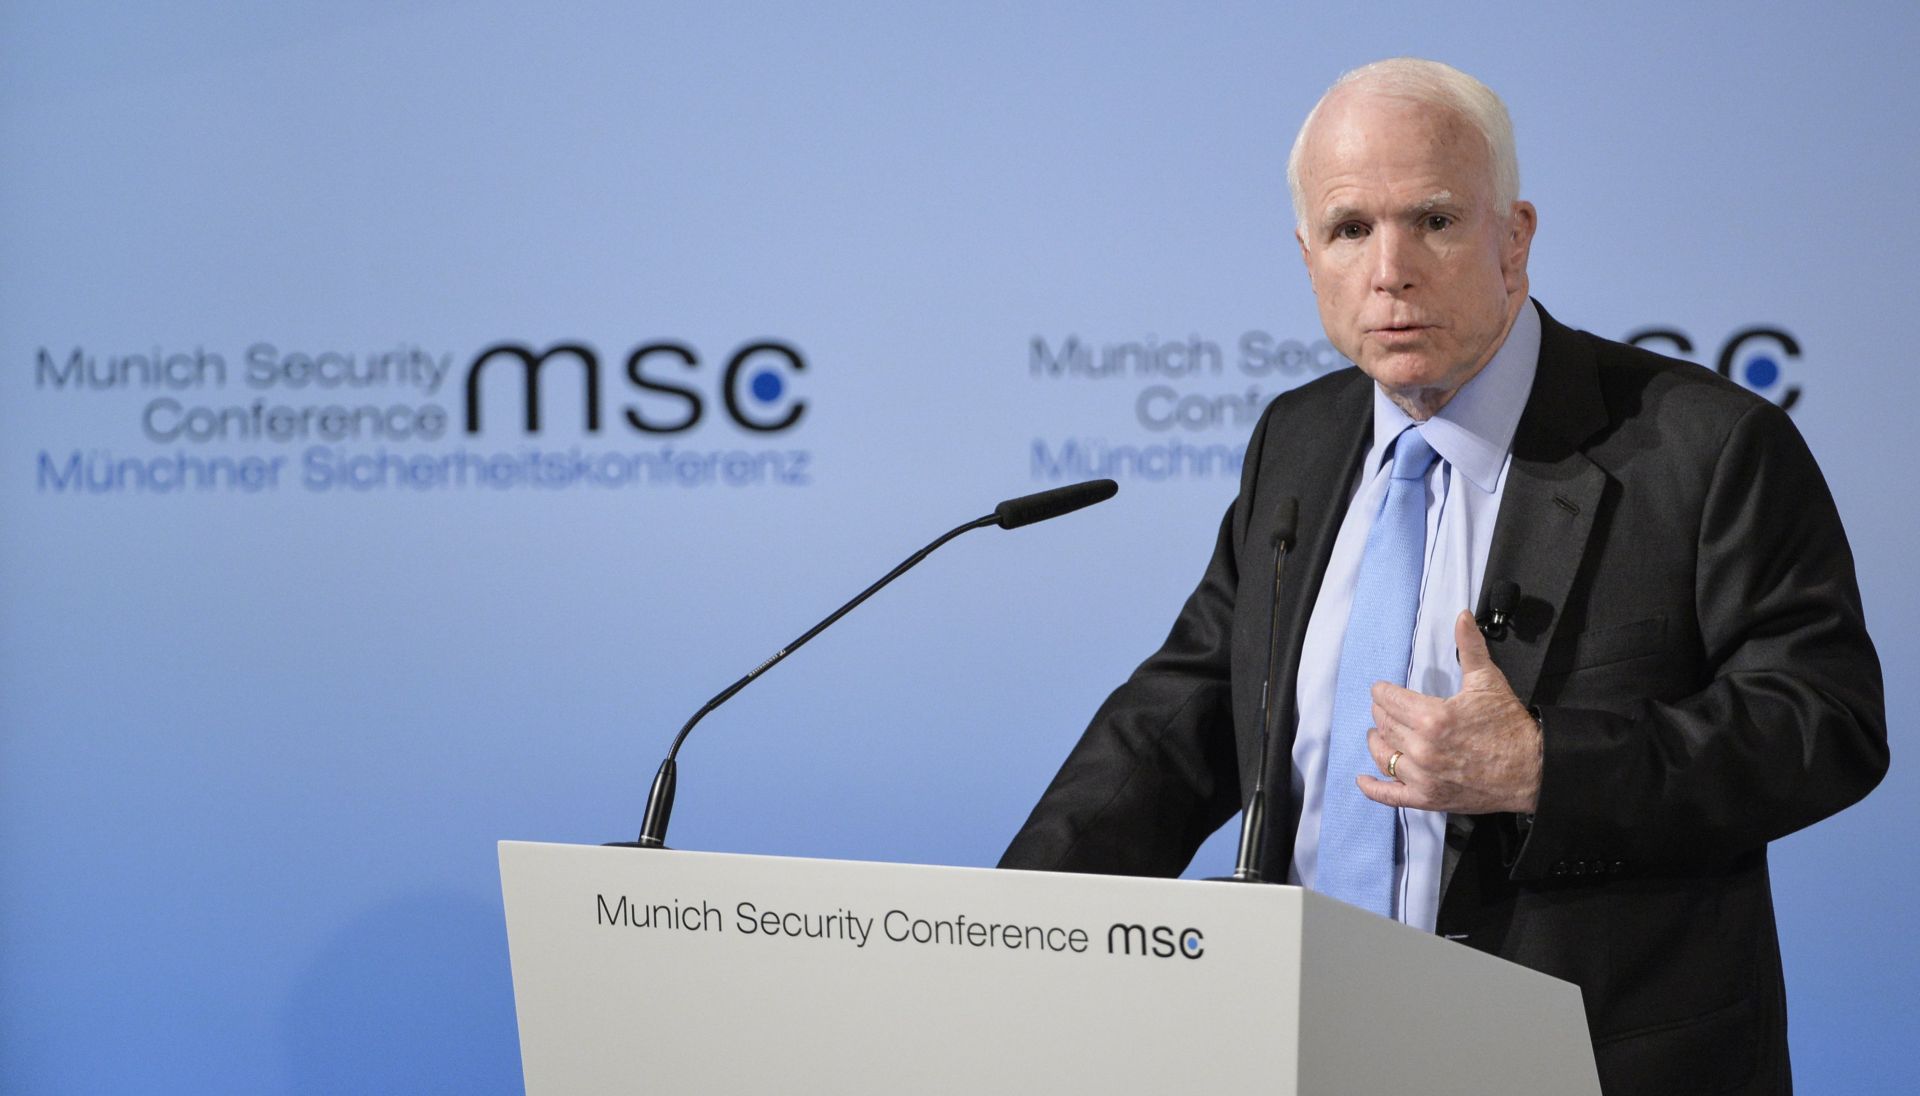 epa05800261 US Senator John McCain speaks during the 53rd Munich Security Conference (MSC) in Munich, Germany, 17 February 2017. In their annual meeting, politicians and various experts and guests from around the world discuss issues surrounding global security from February 17 to 19.  EPA/PHILIPP GUELLAND